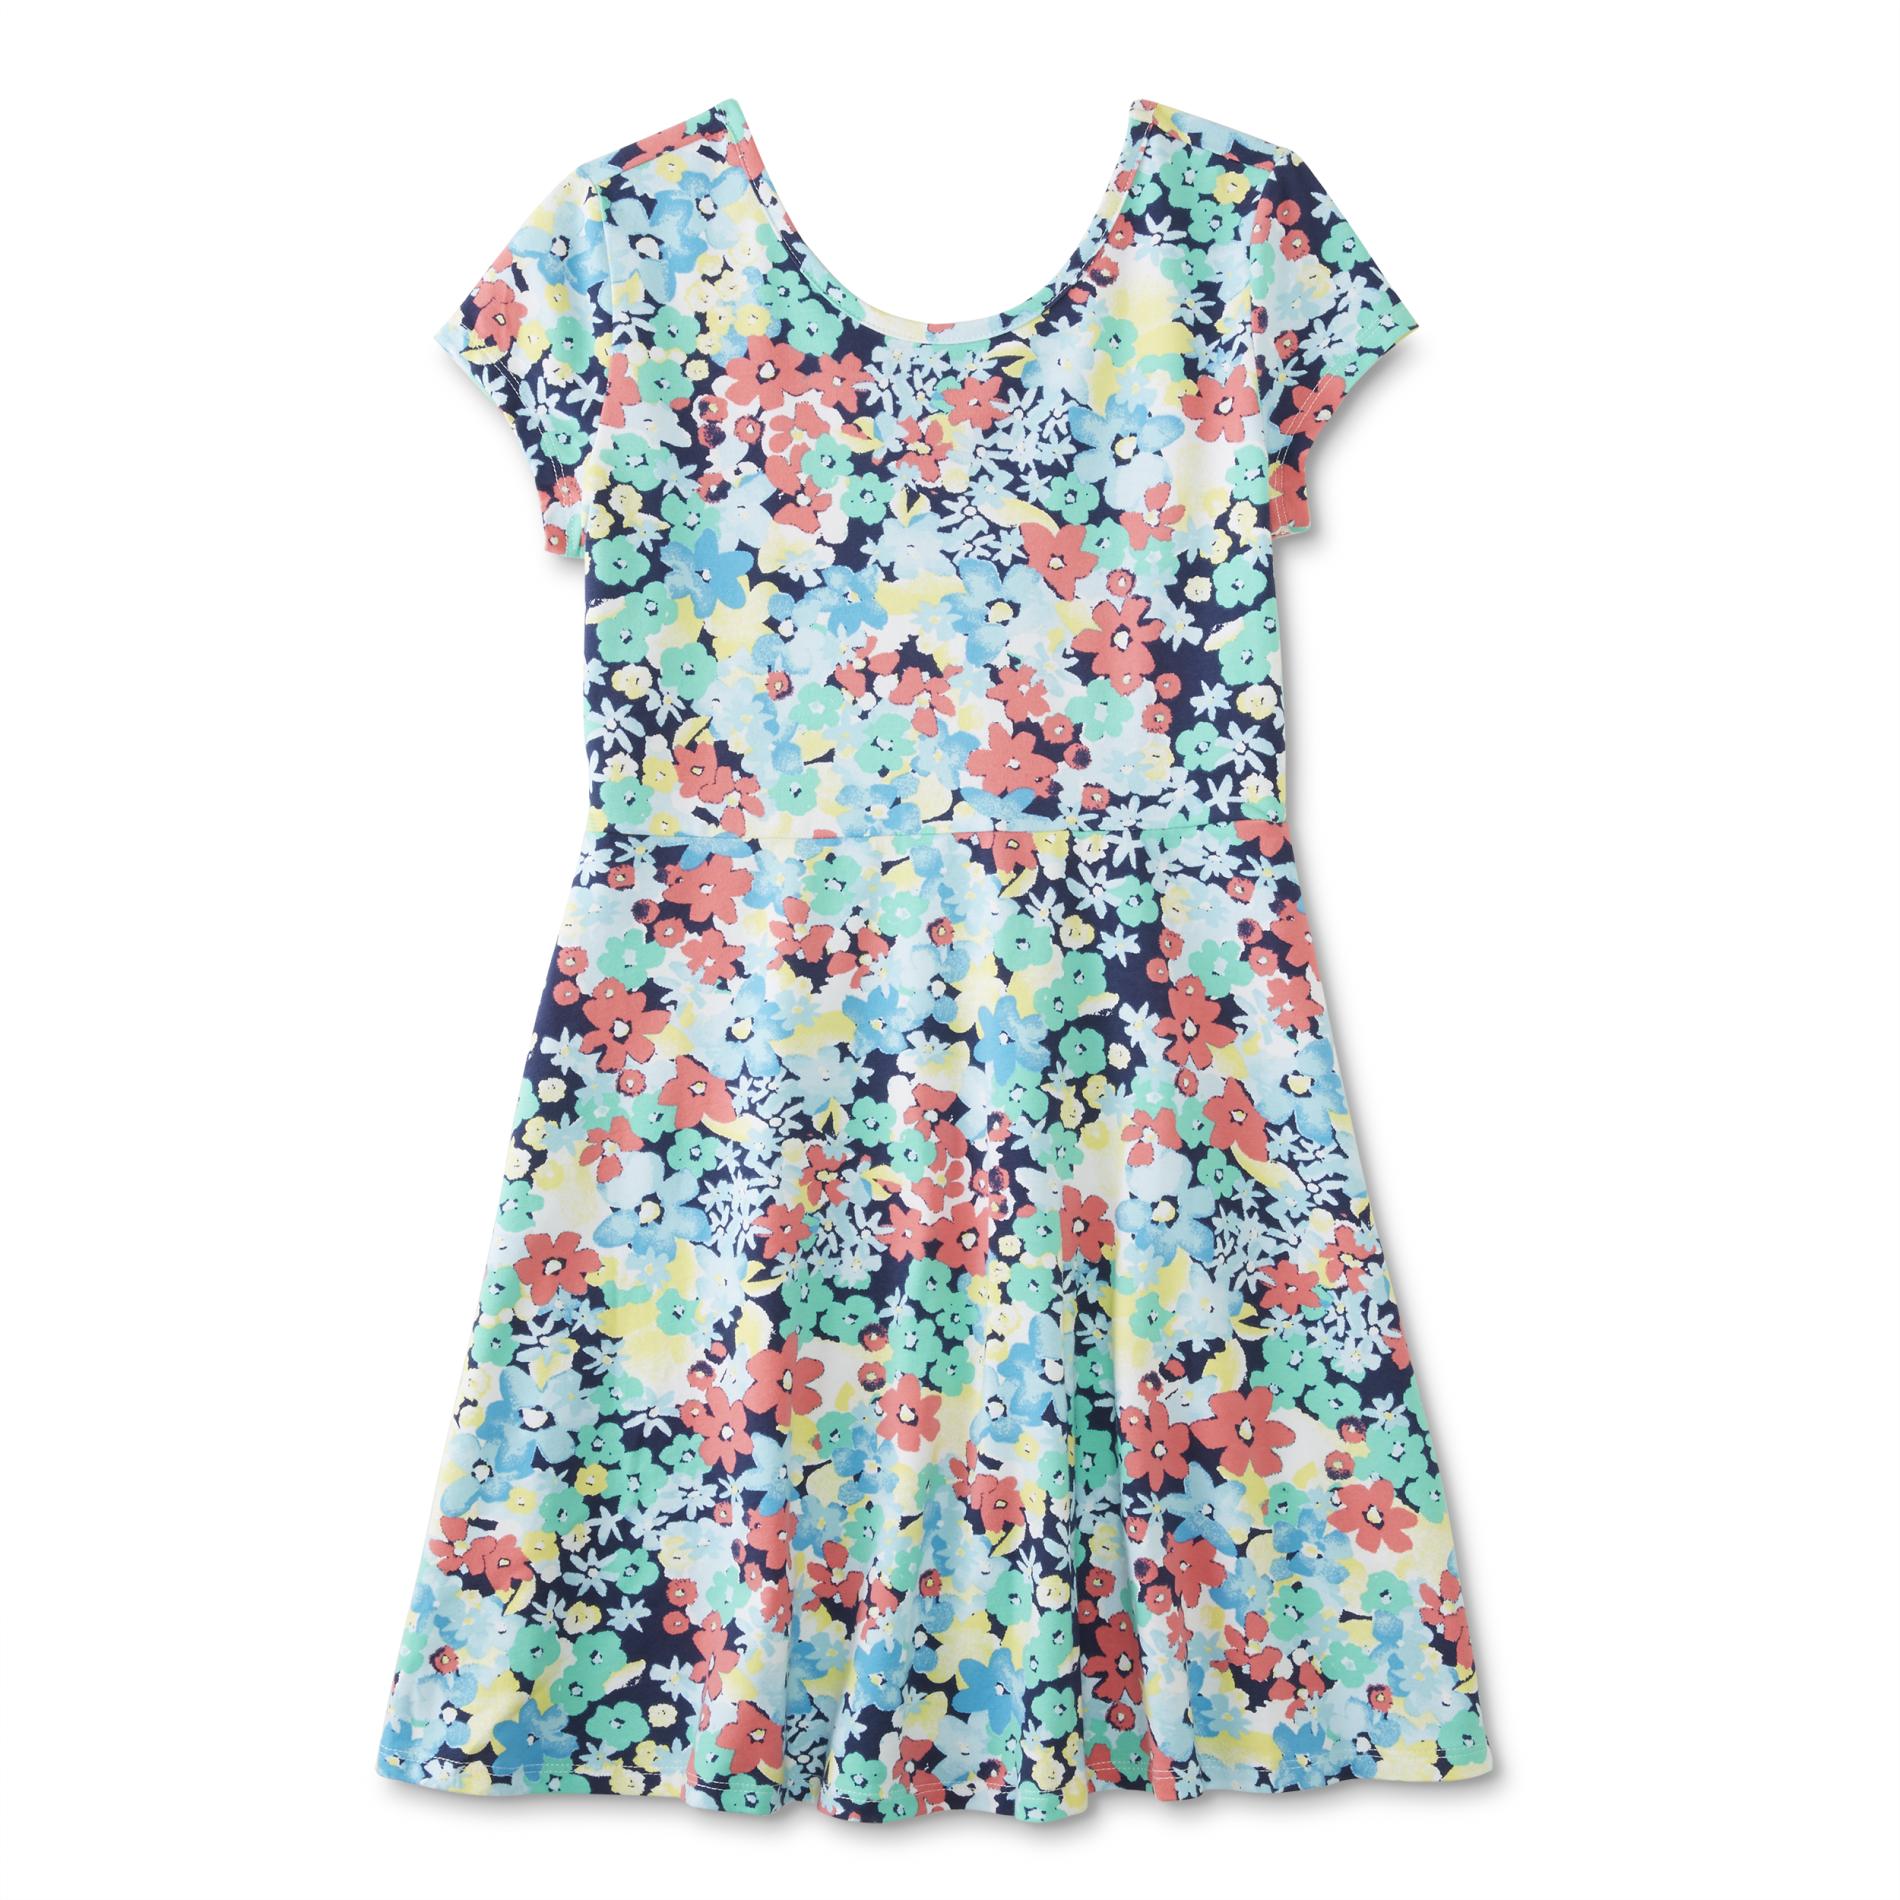 Simply Styled Girls' Plus Skater Dress - Floral